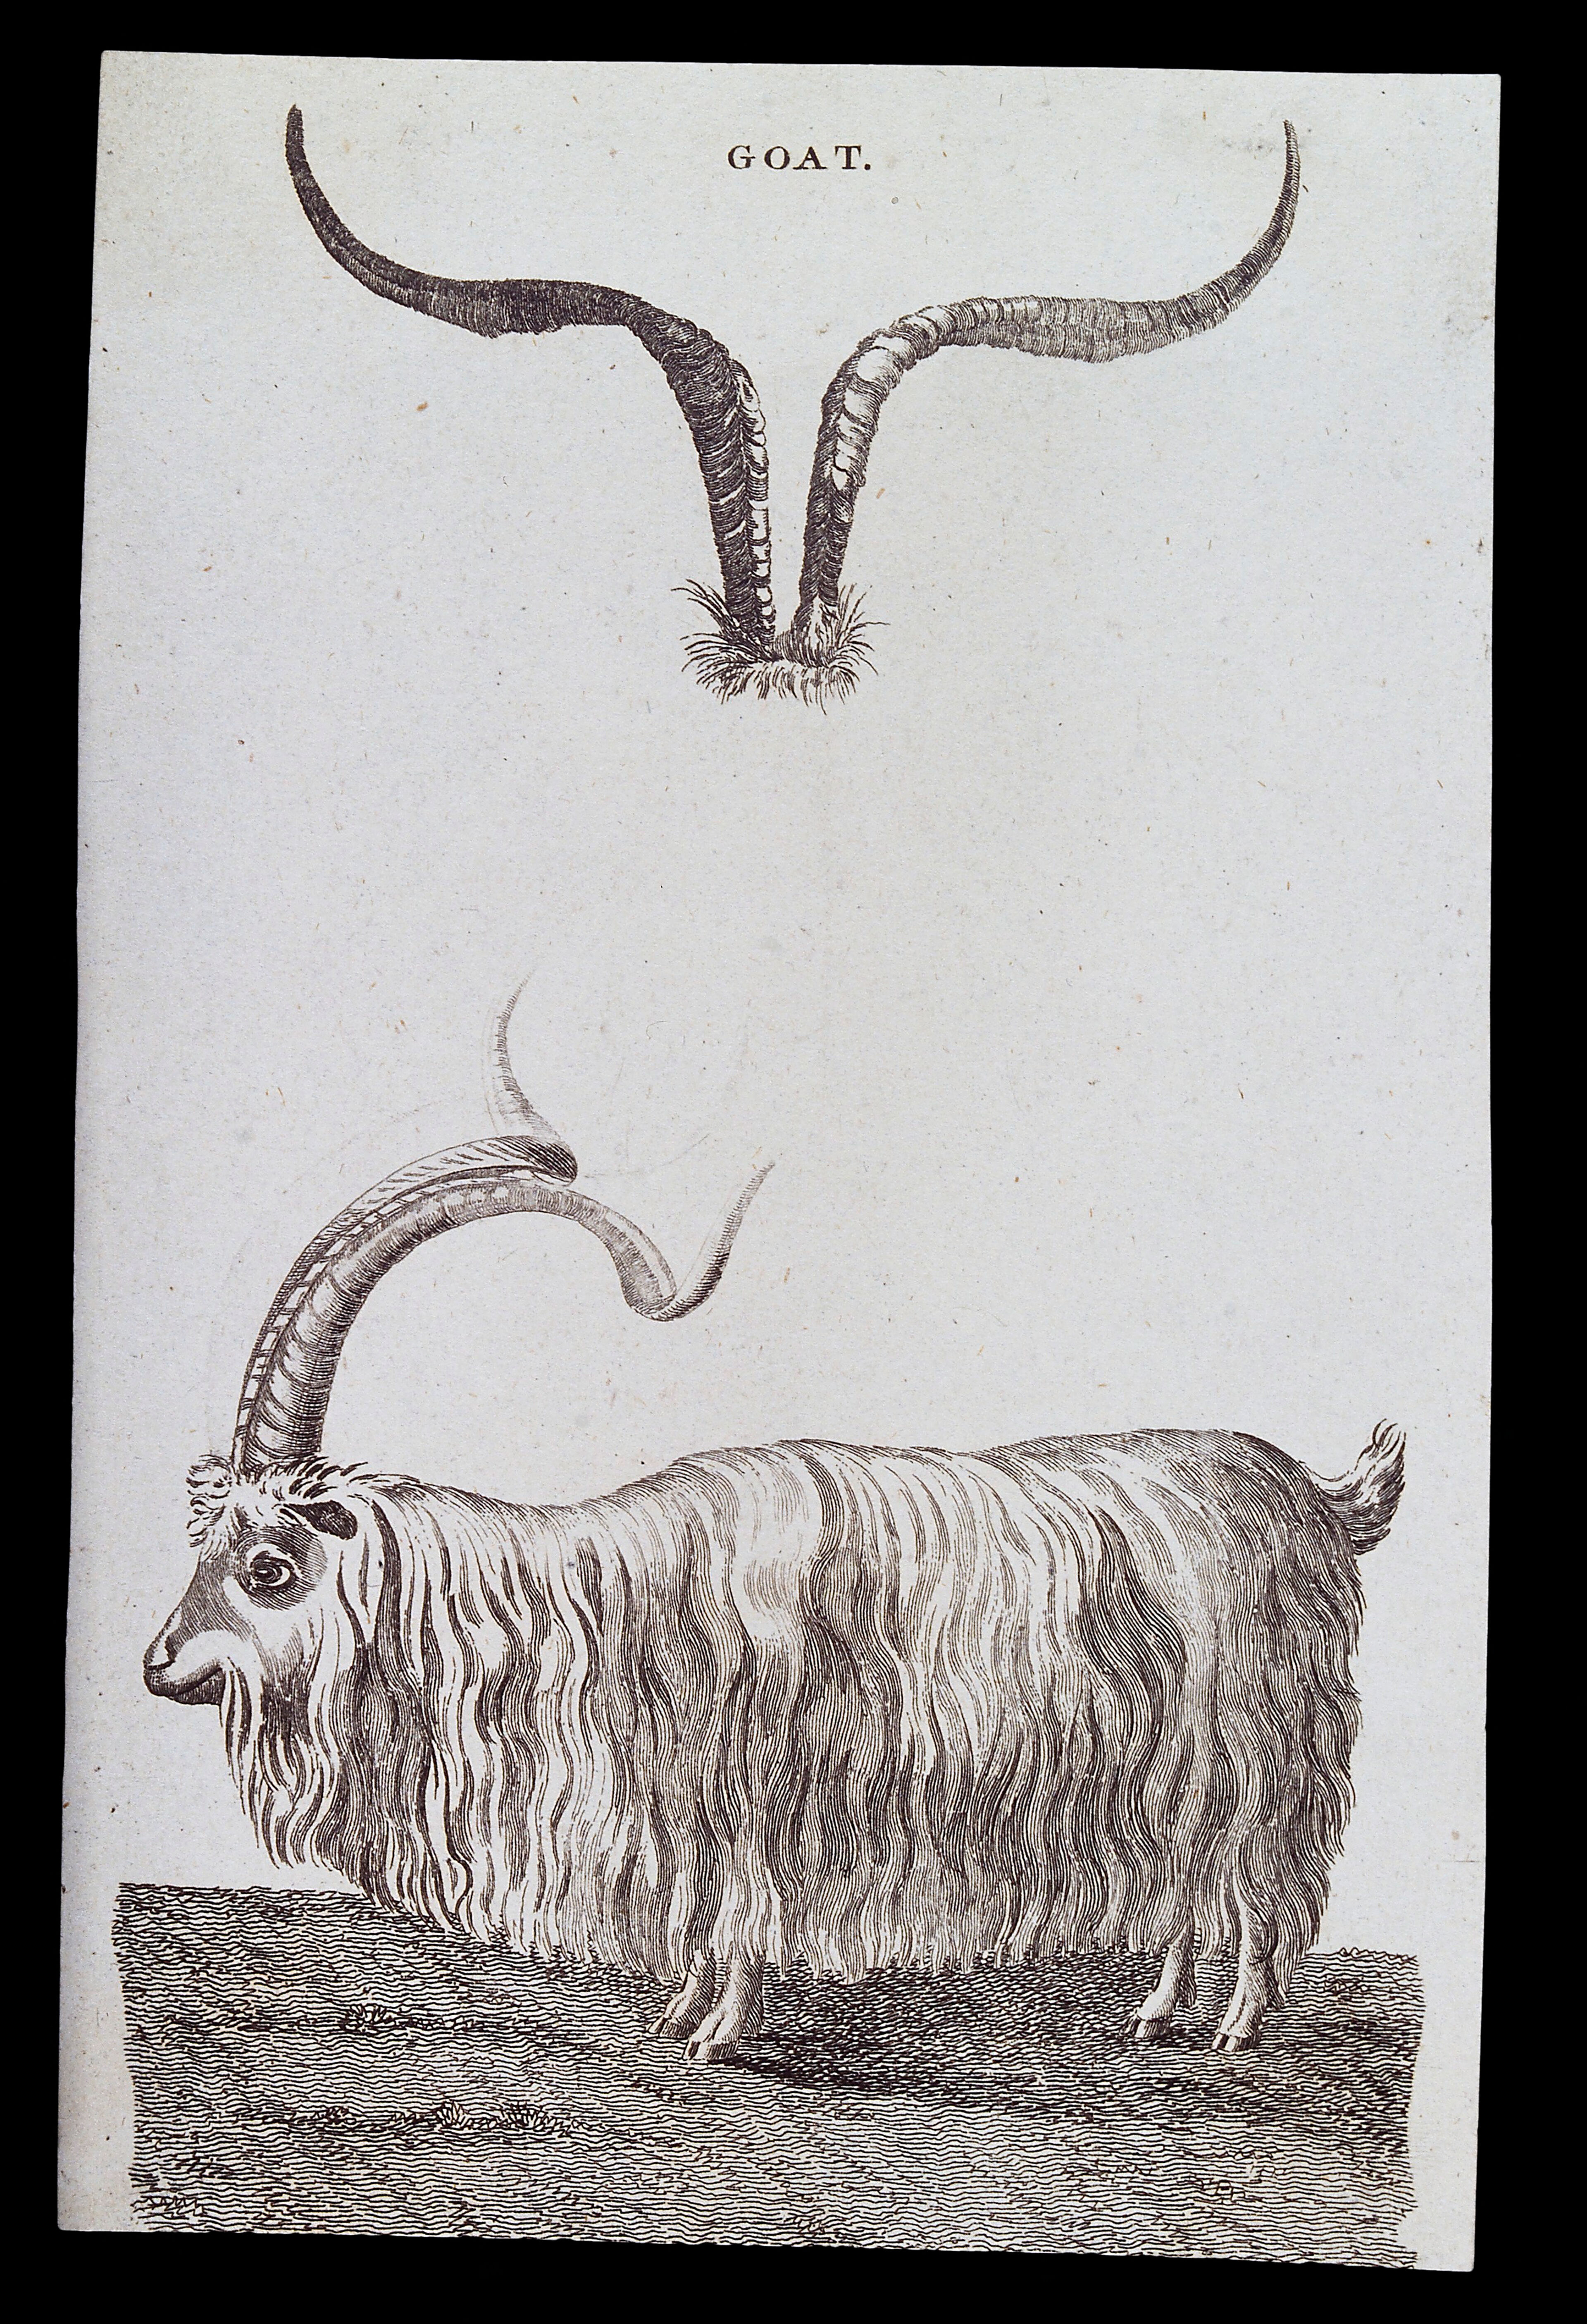 A hairy goat with long curved horns. Engraving.